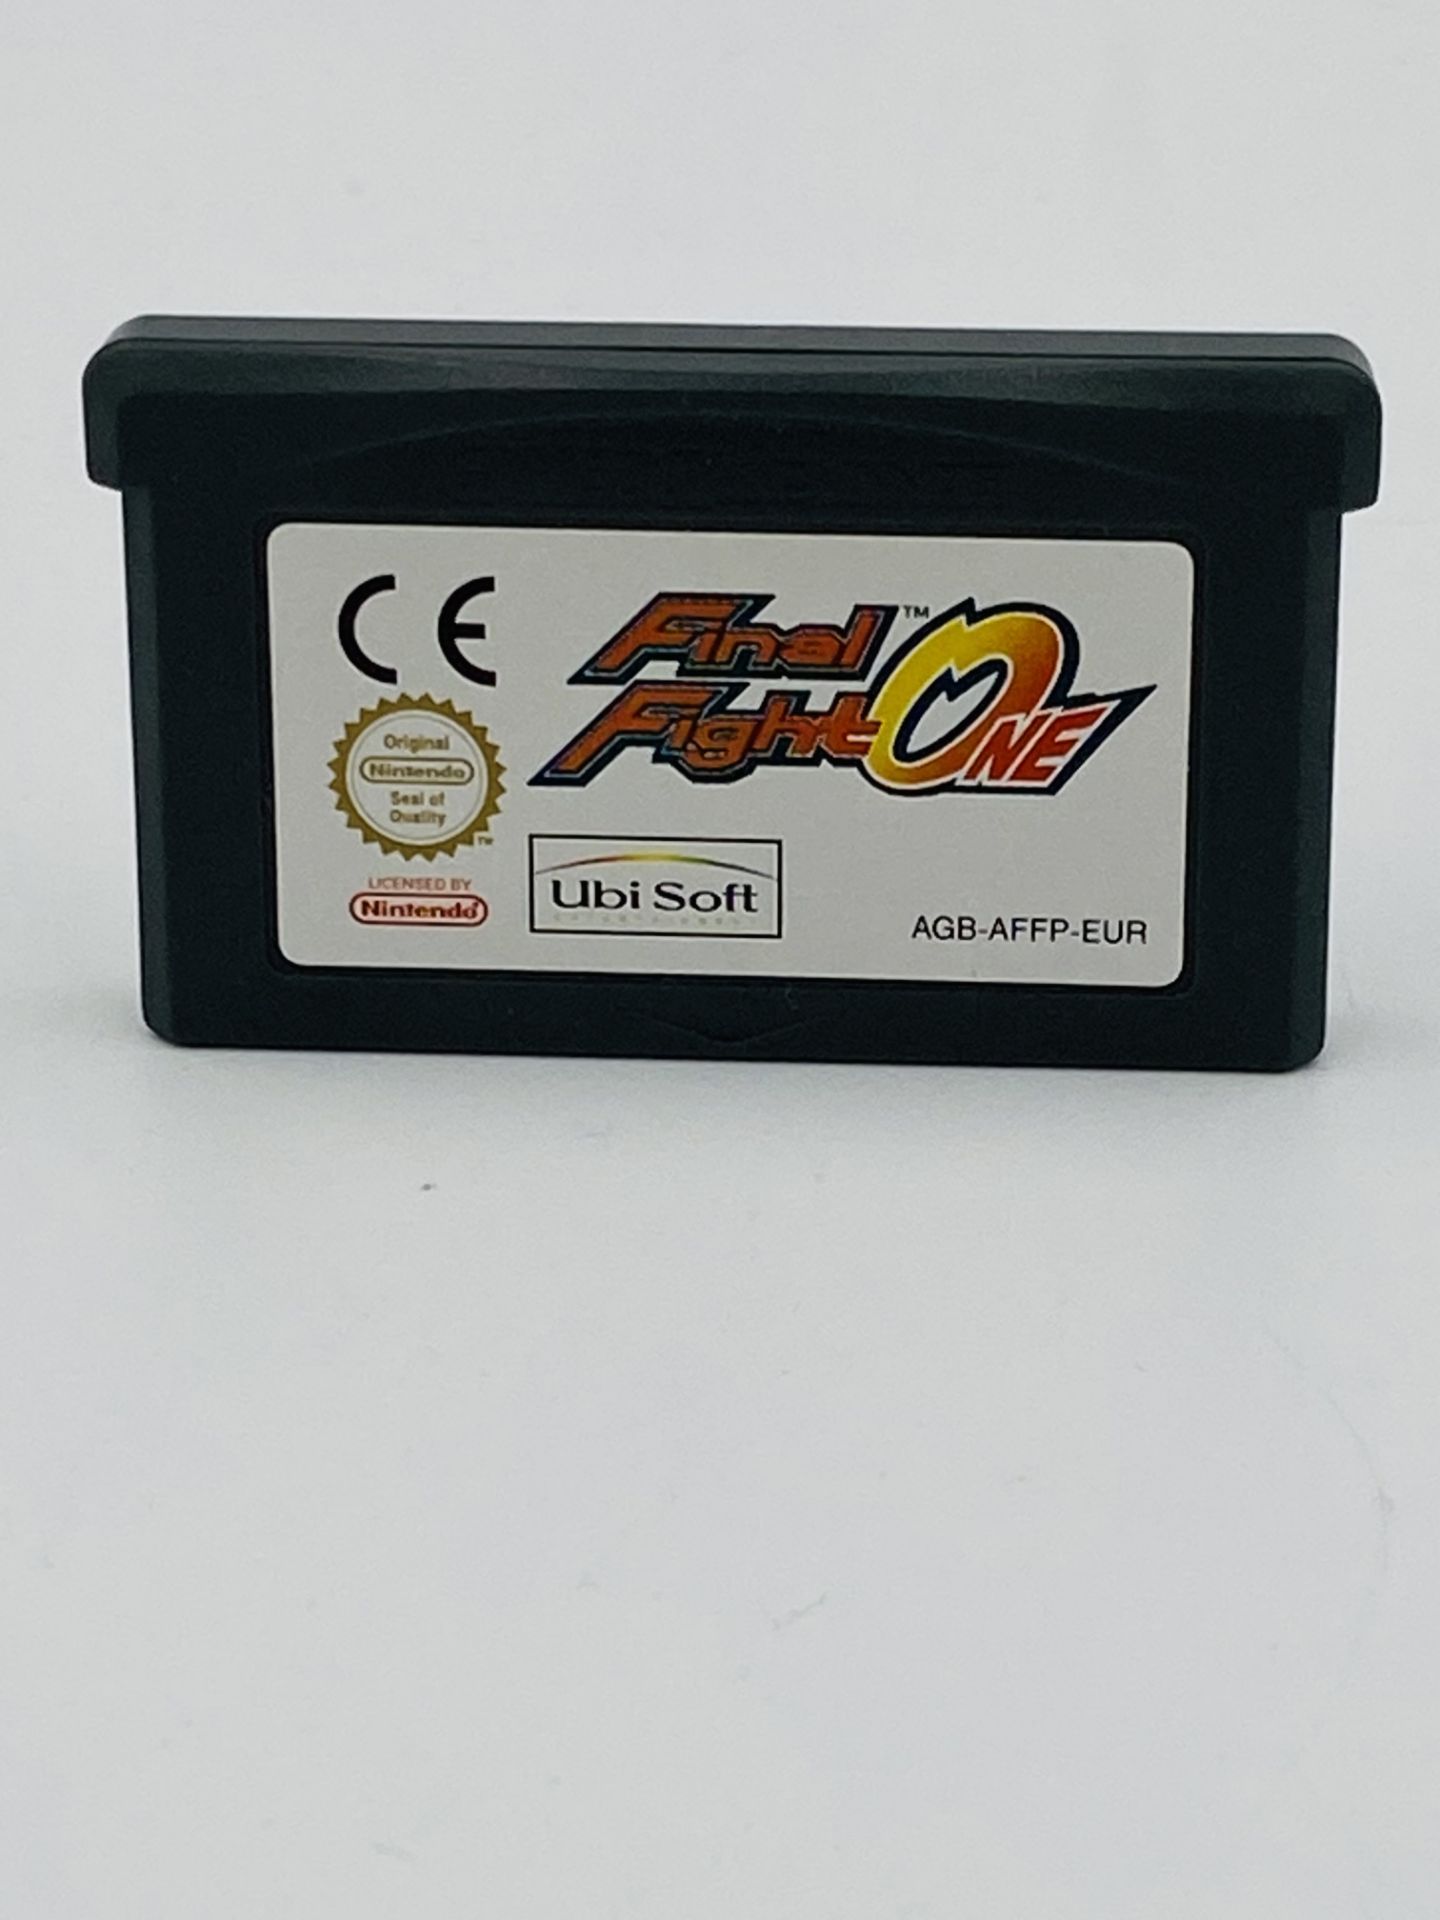 Nintendo Game Boy Advance Final Fight One, boxed - Image 4 of 4